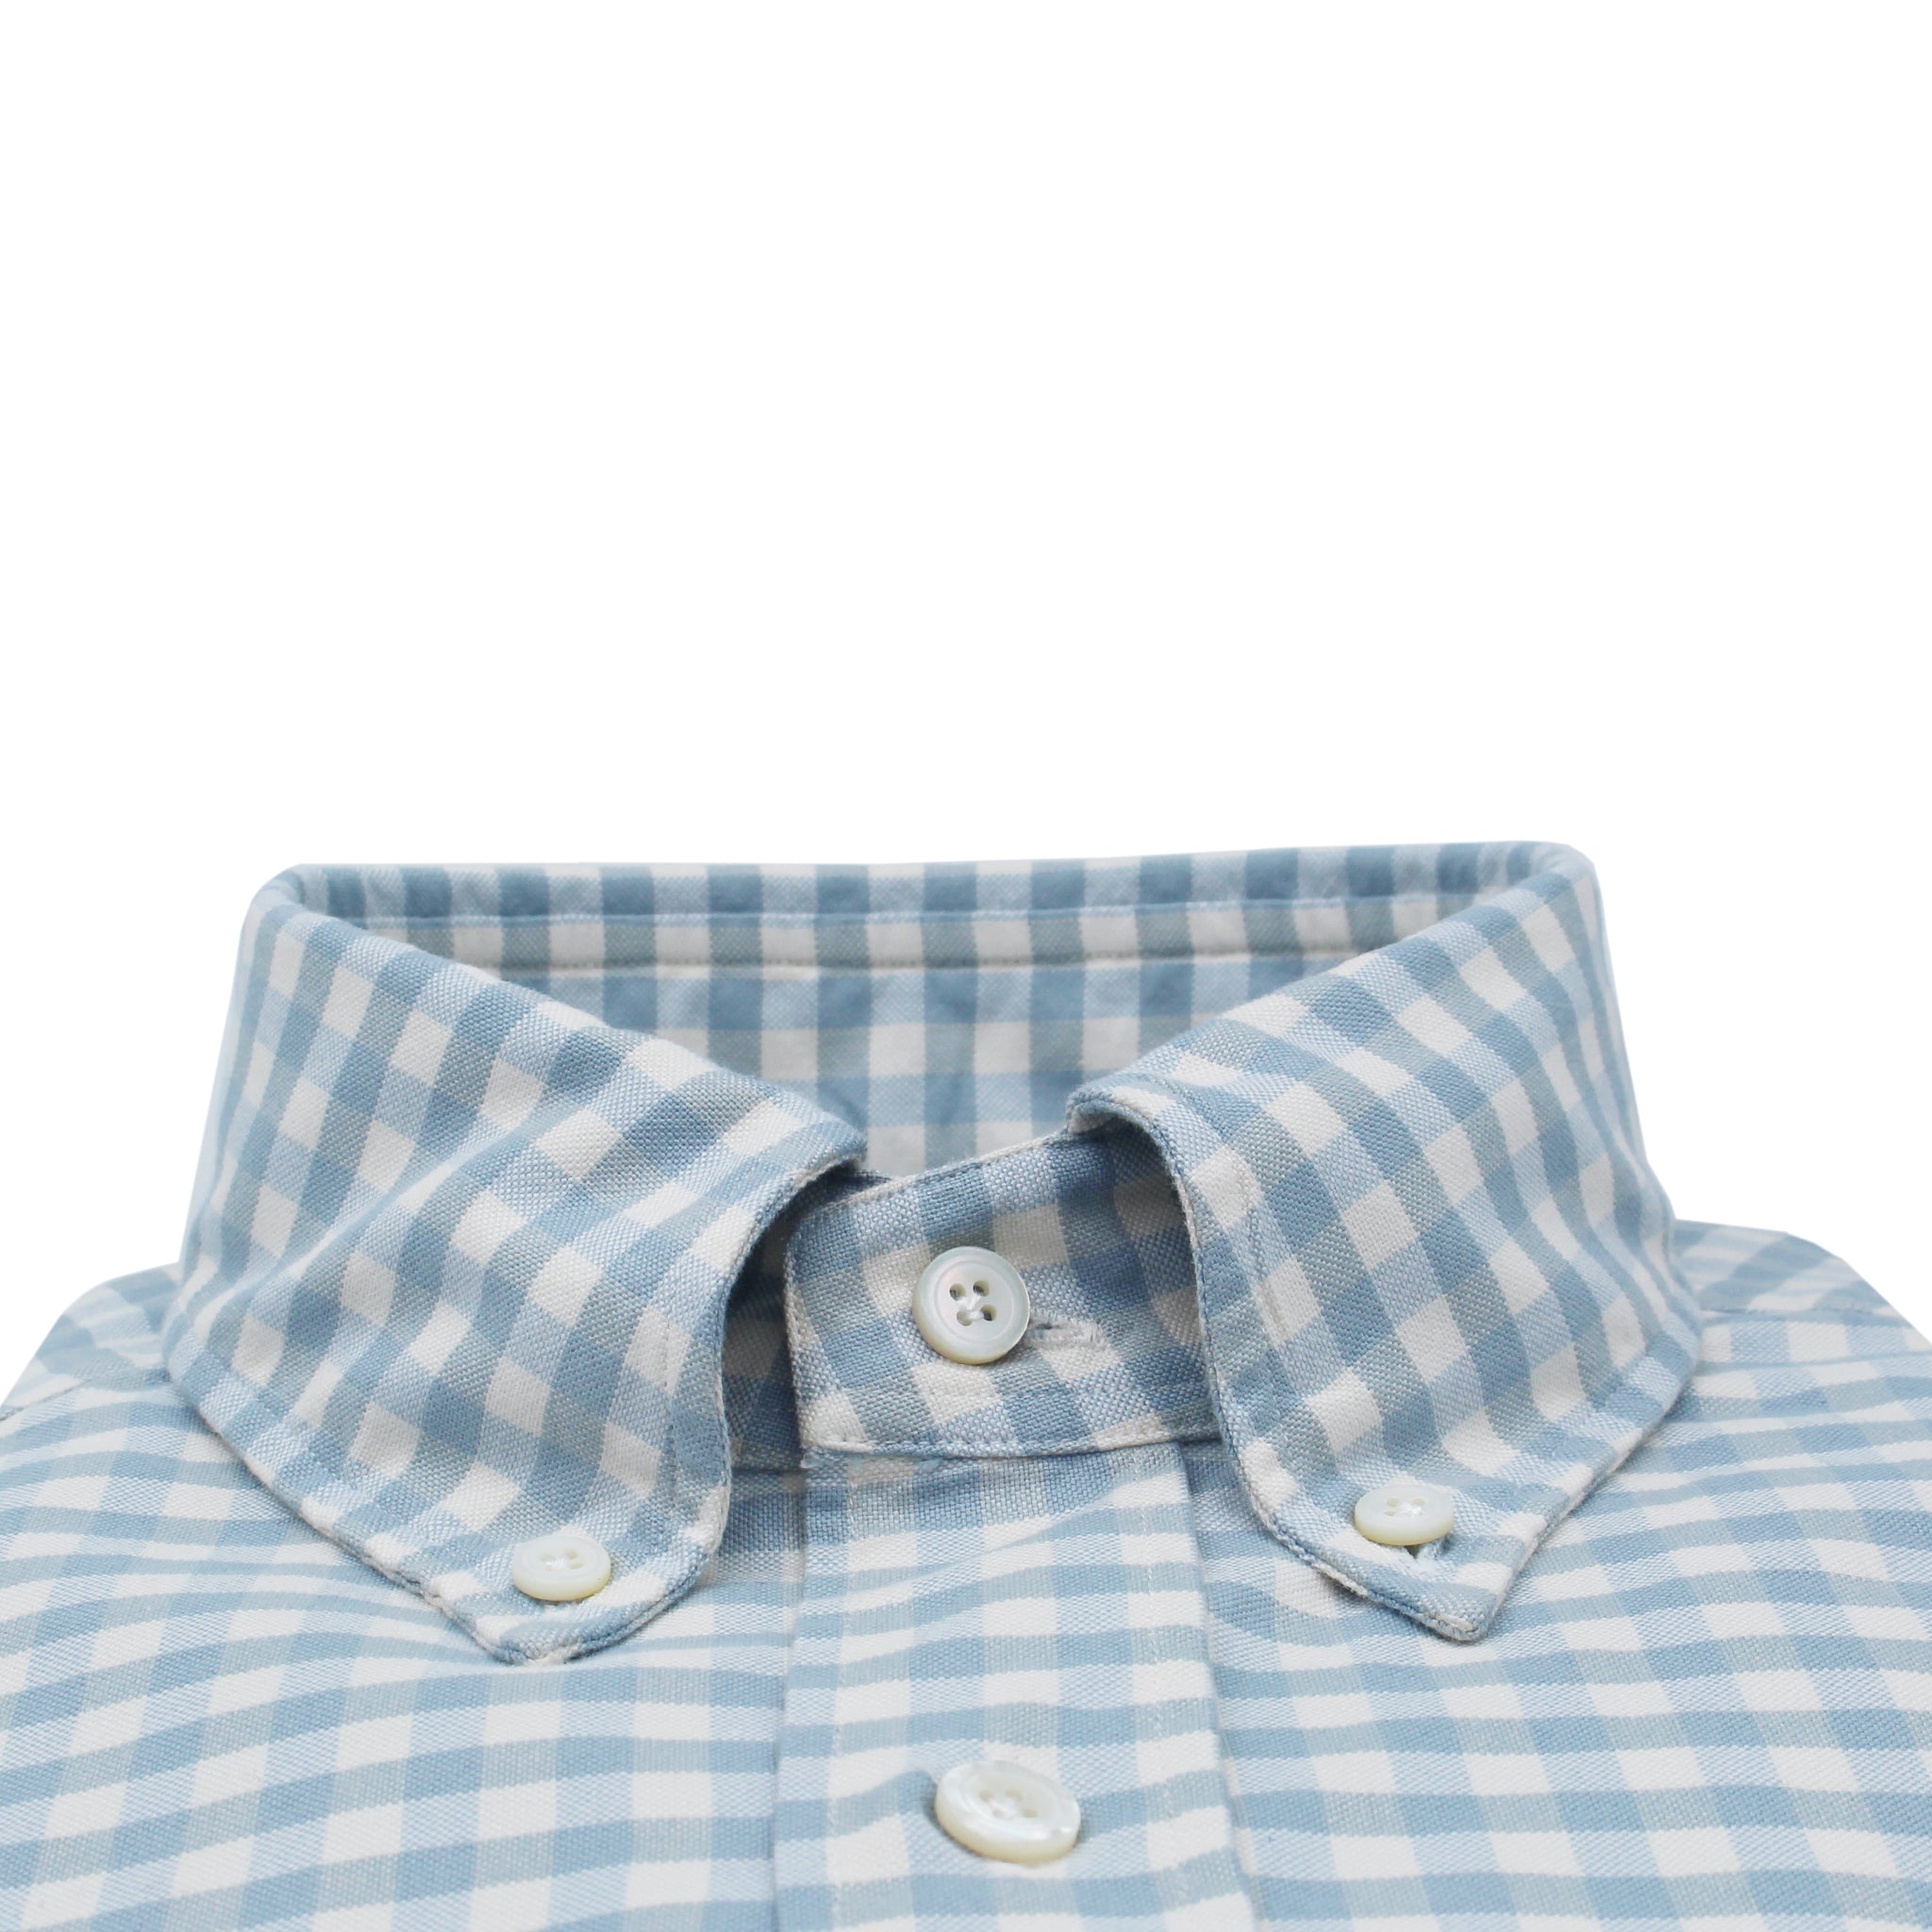 Toledo slim fit sport shirt in orange and light blue checked cotton